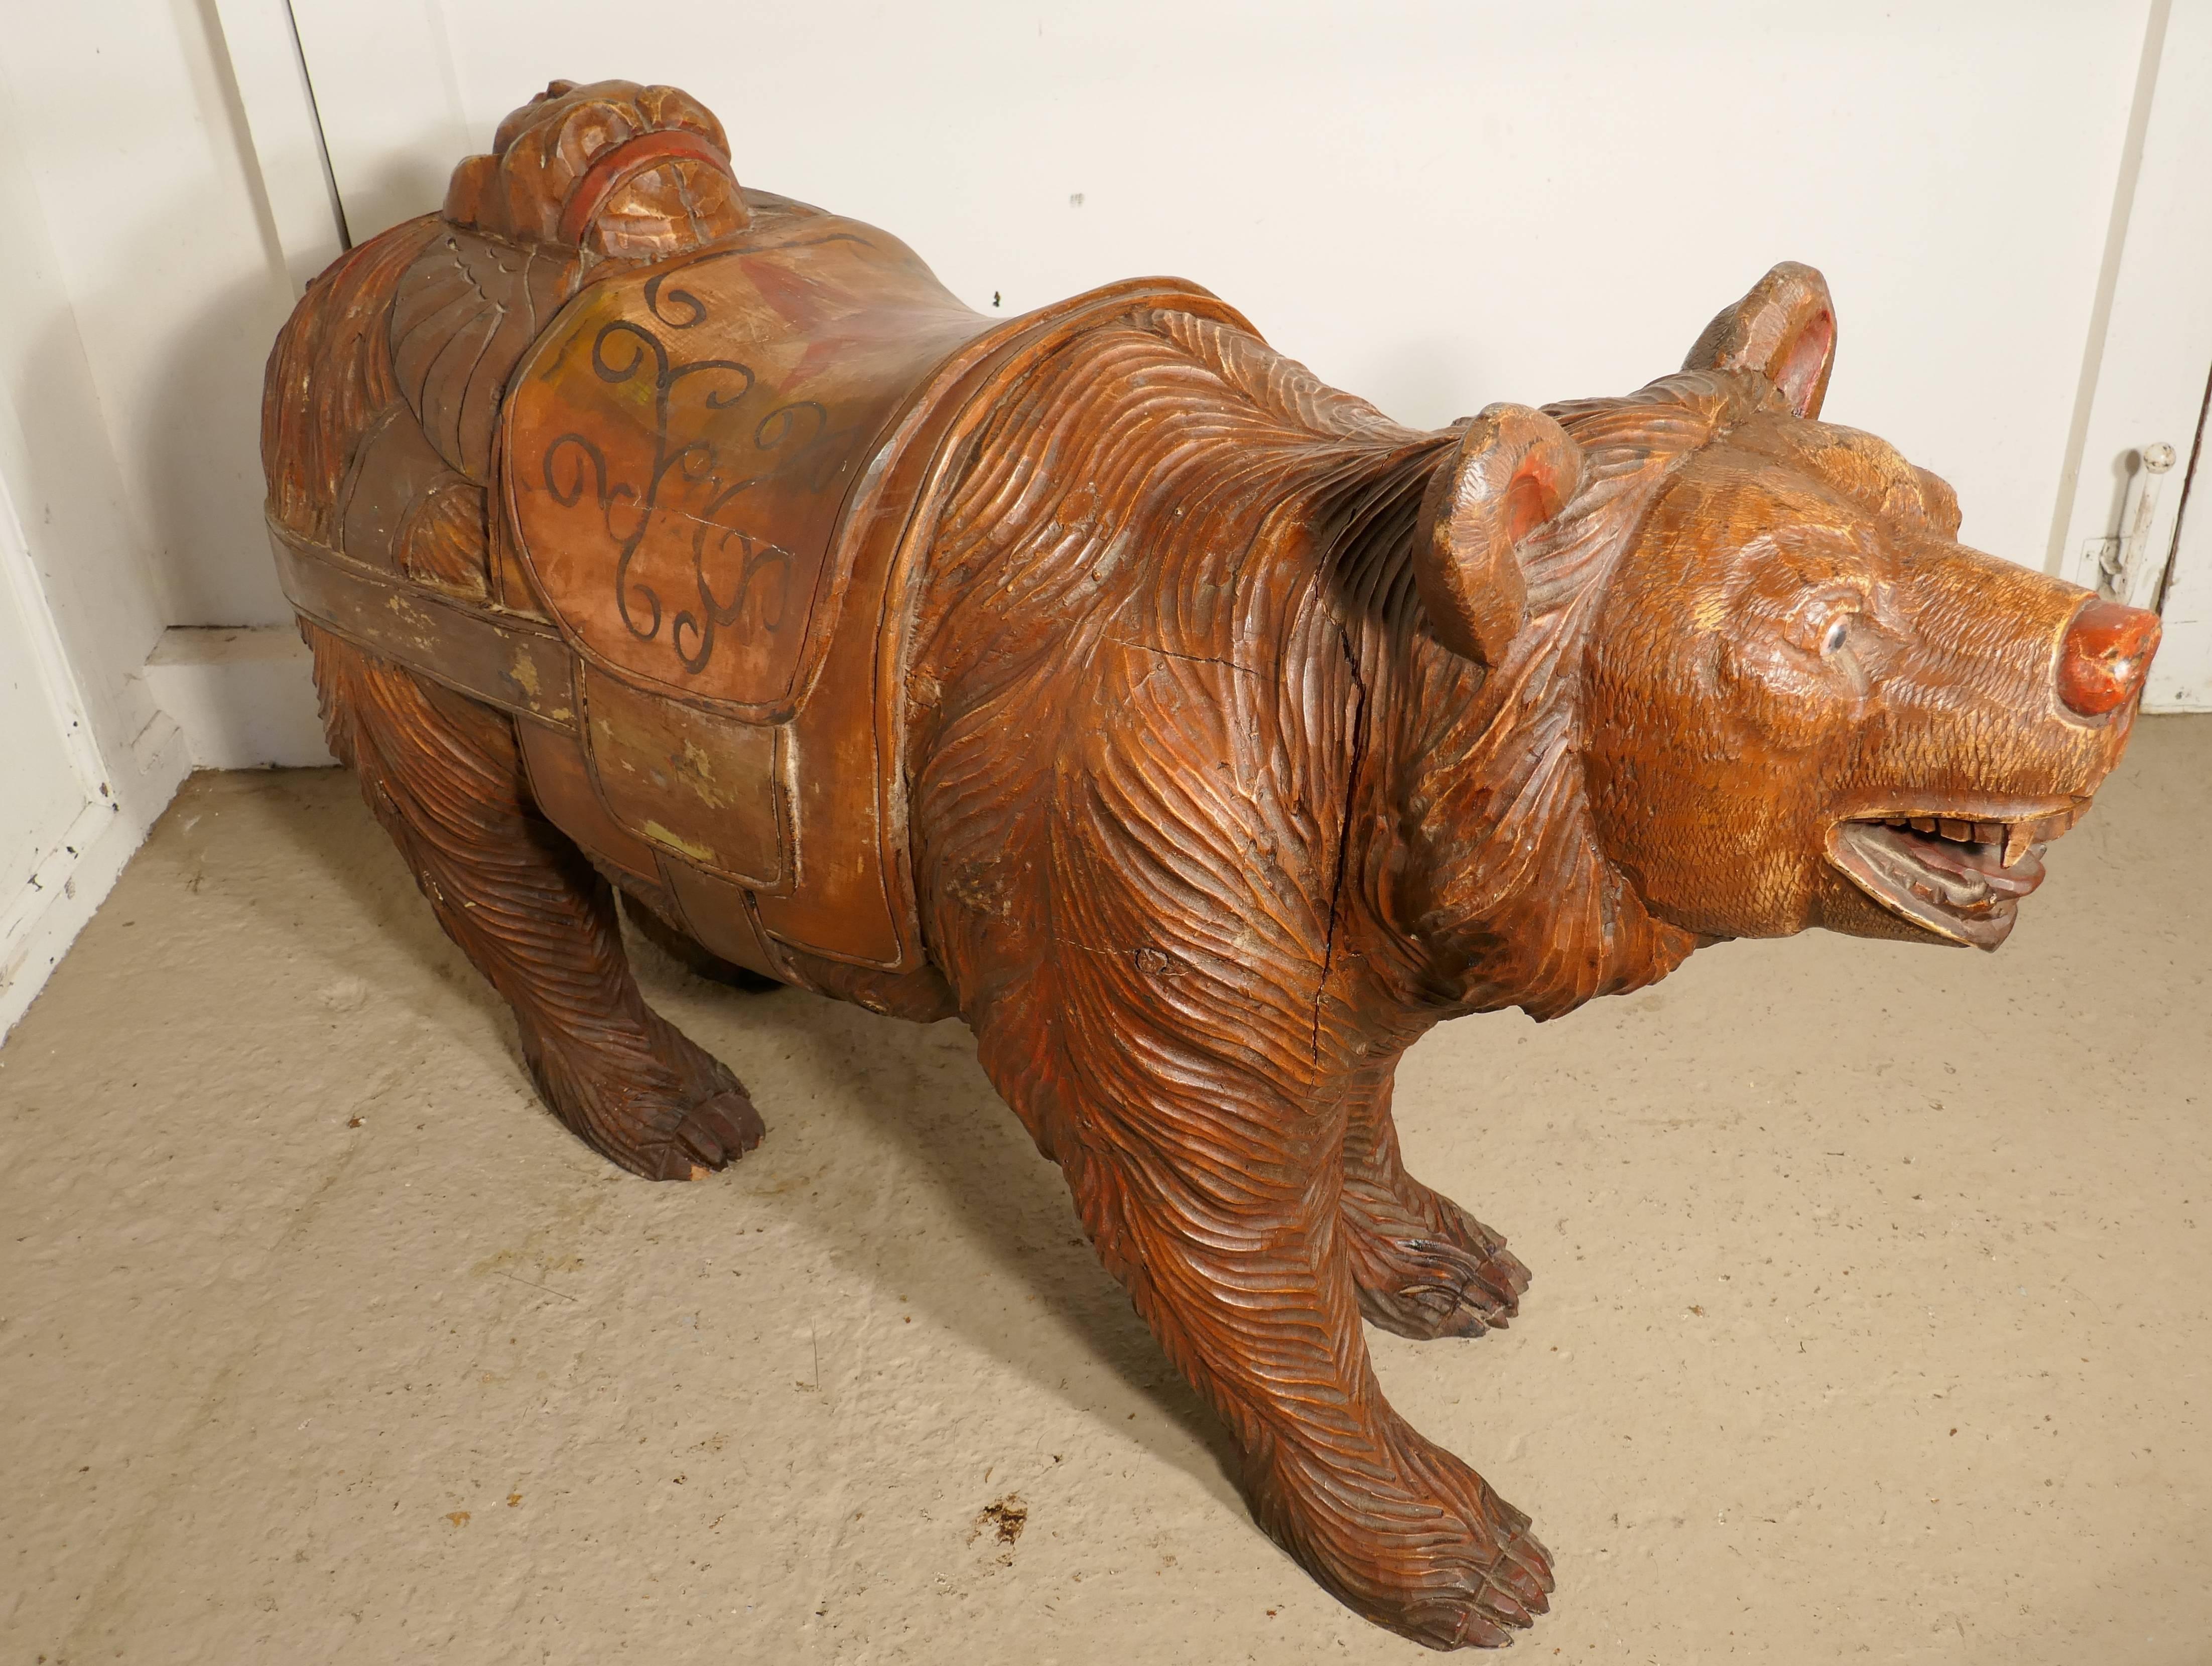 This charming if somewhat fearsome beast is a 19th century carved wooden bear he originates from the Black Forrest and has has detailed carving with Folk Art painted decoration
Our bear comes from a country merry go round or carousel, he is made